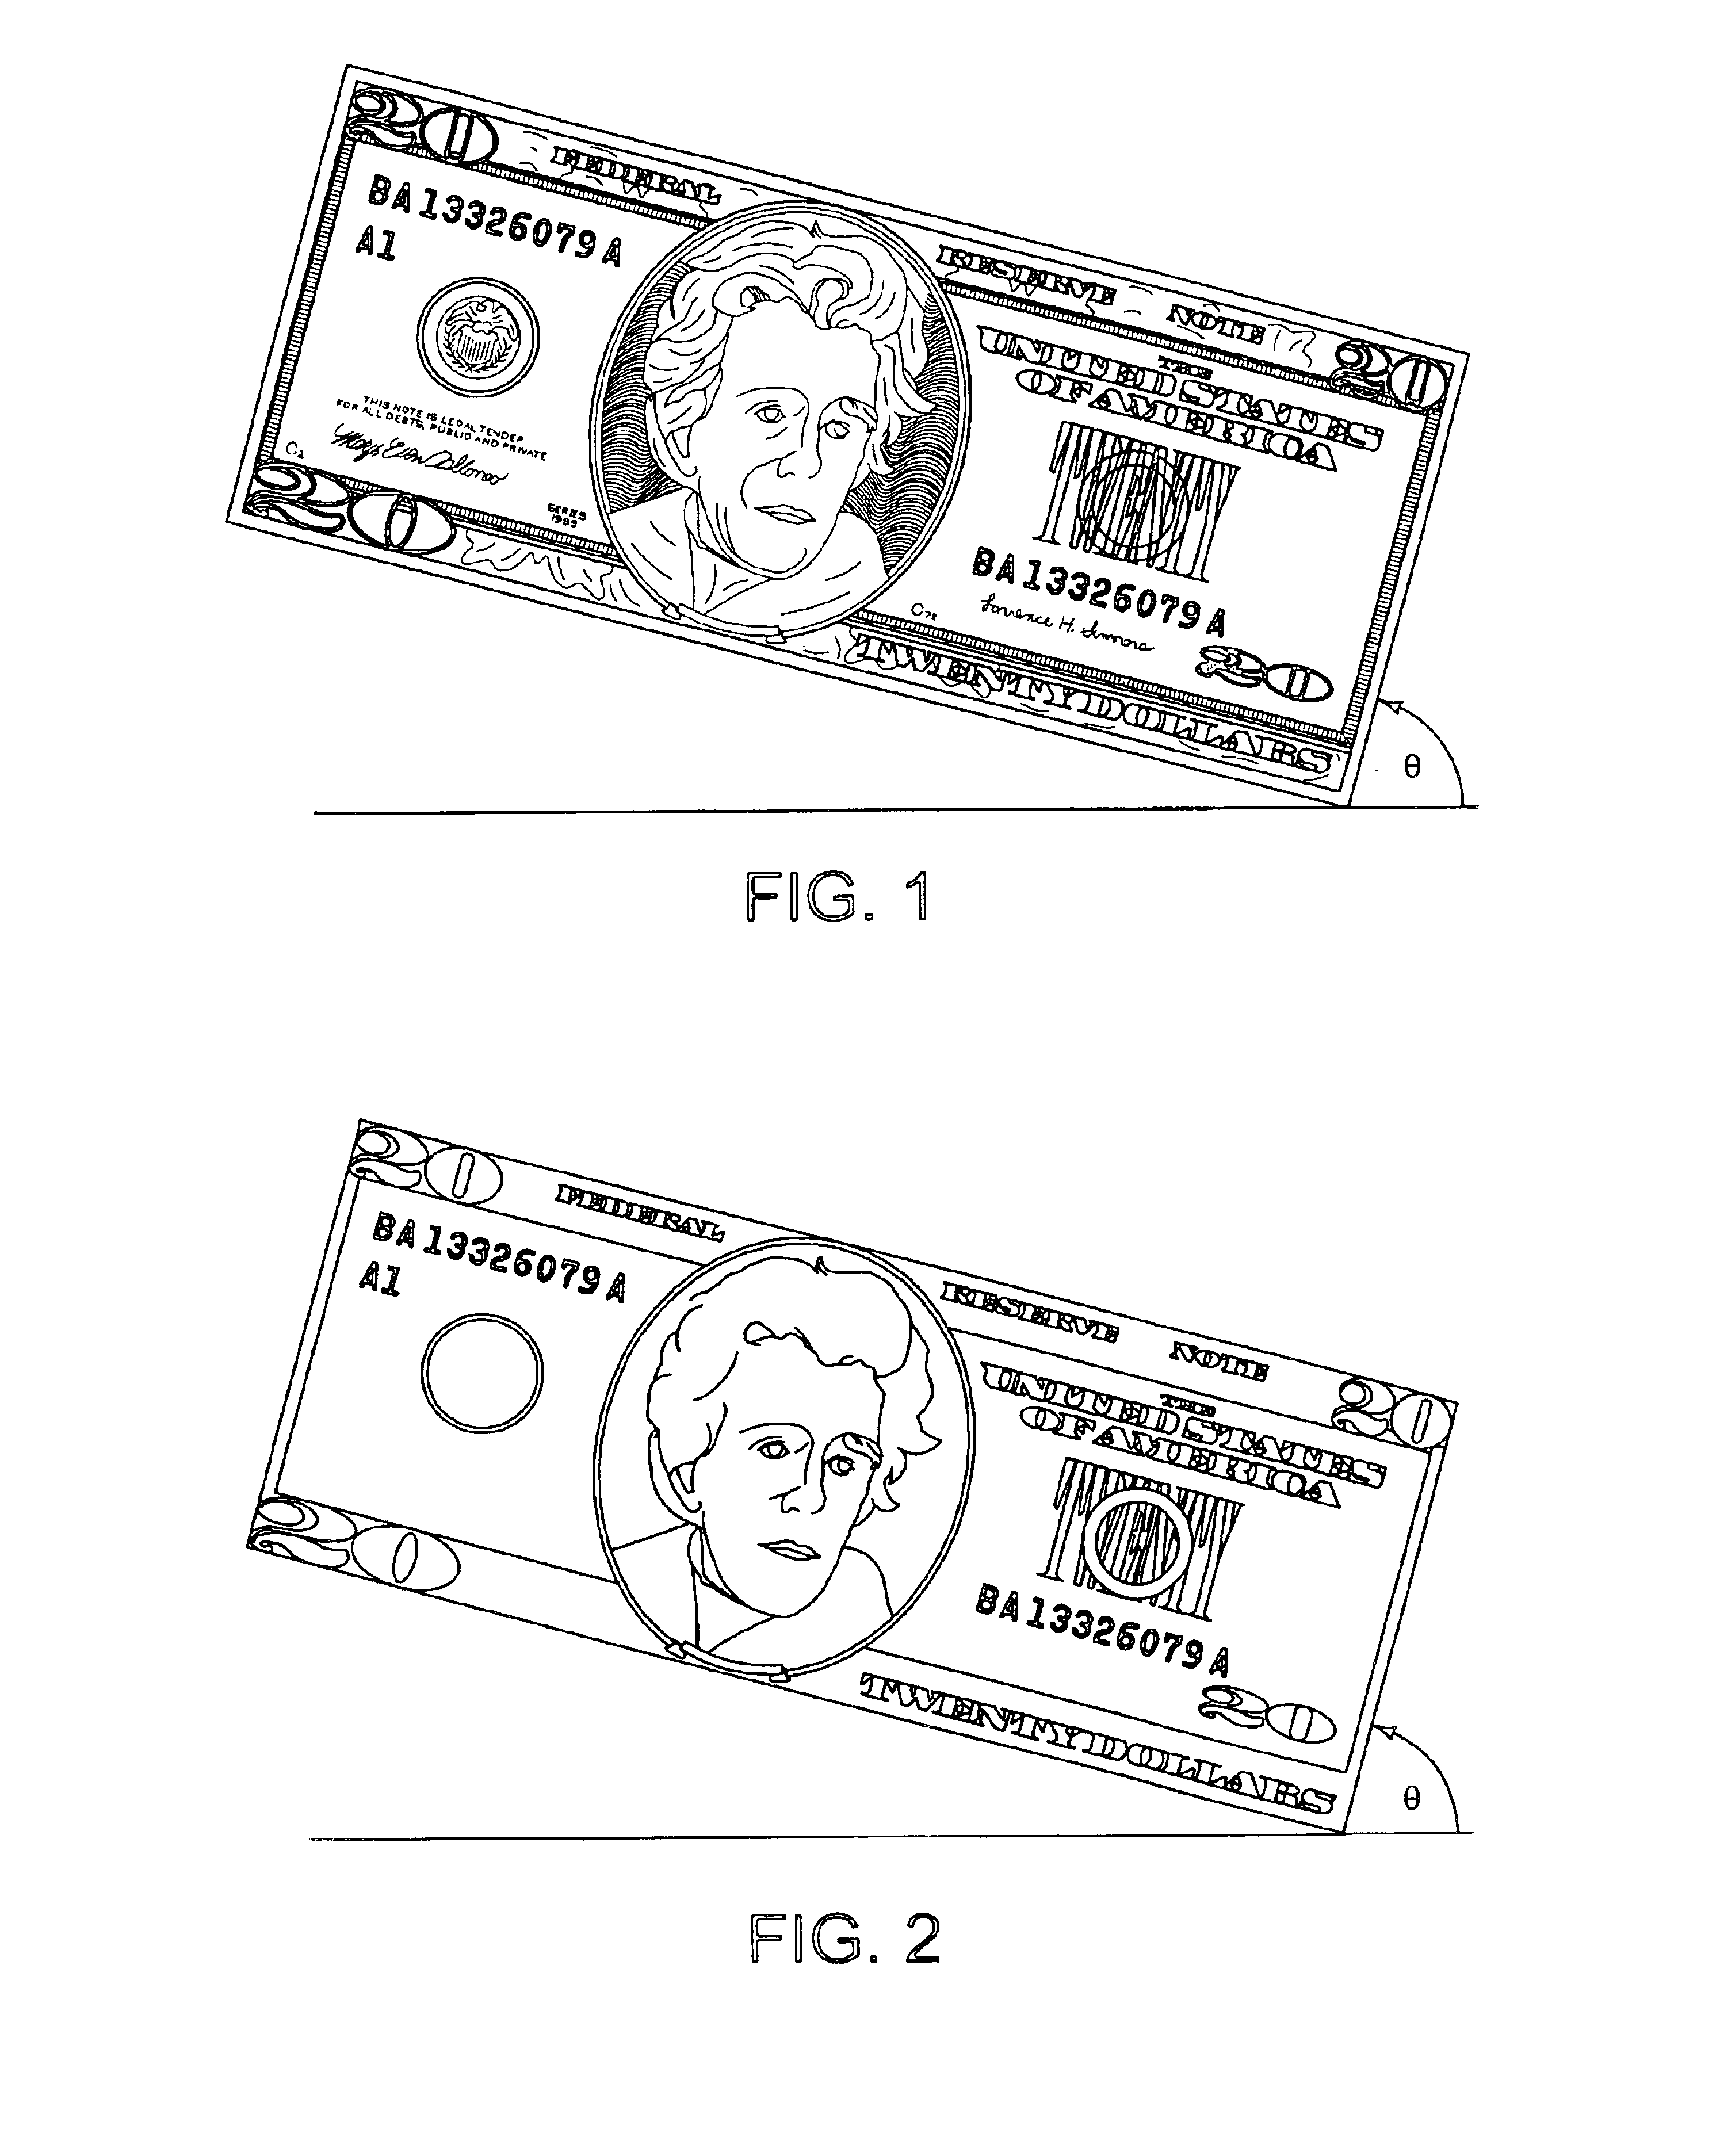 Method and system for determining image transformation